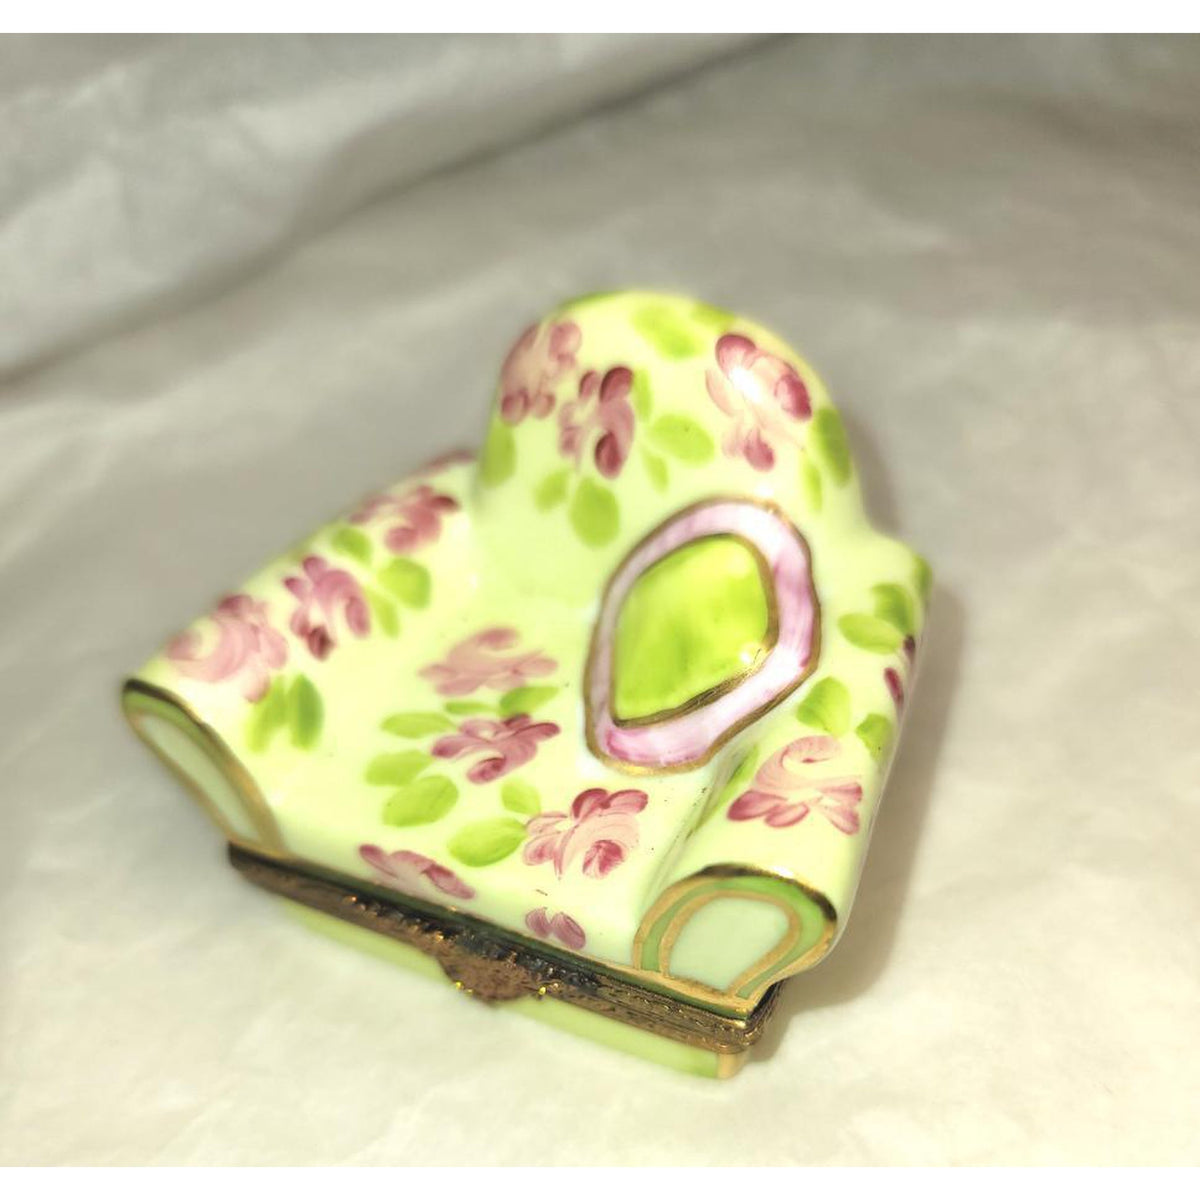 Flowered Chair No. 1 of 750 Limoges Box Figurine - Limoges Box Boutique